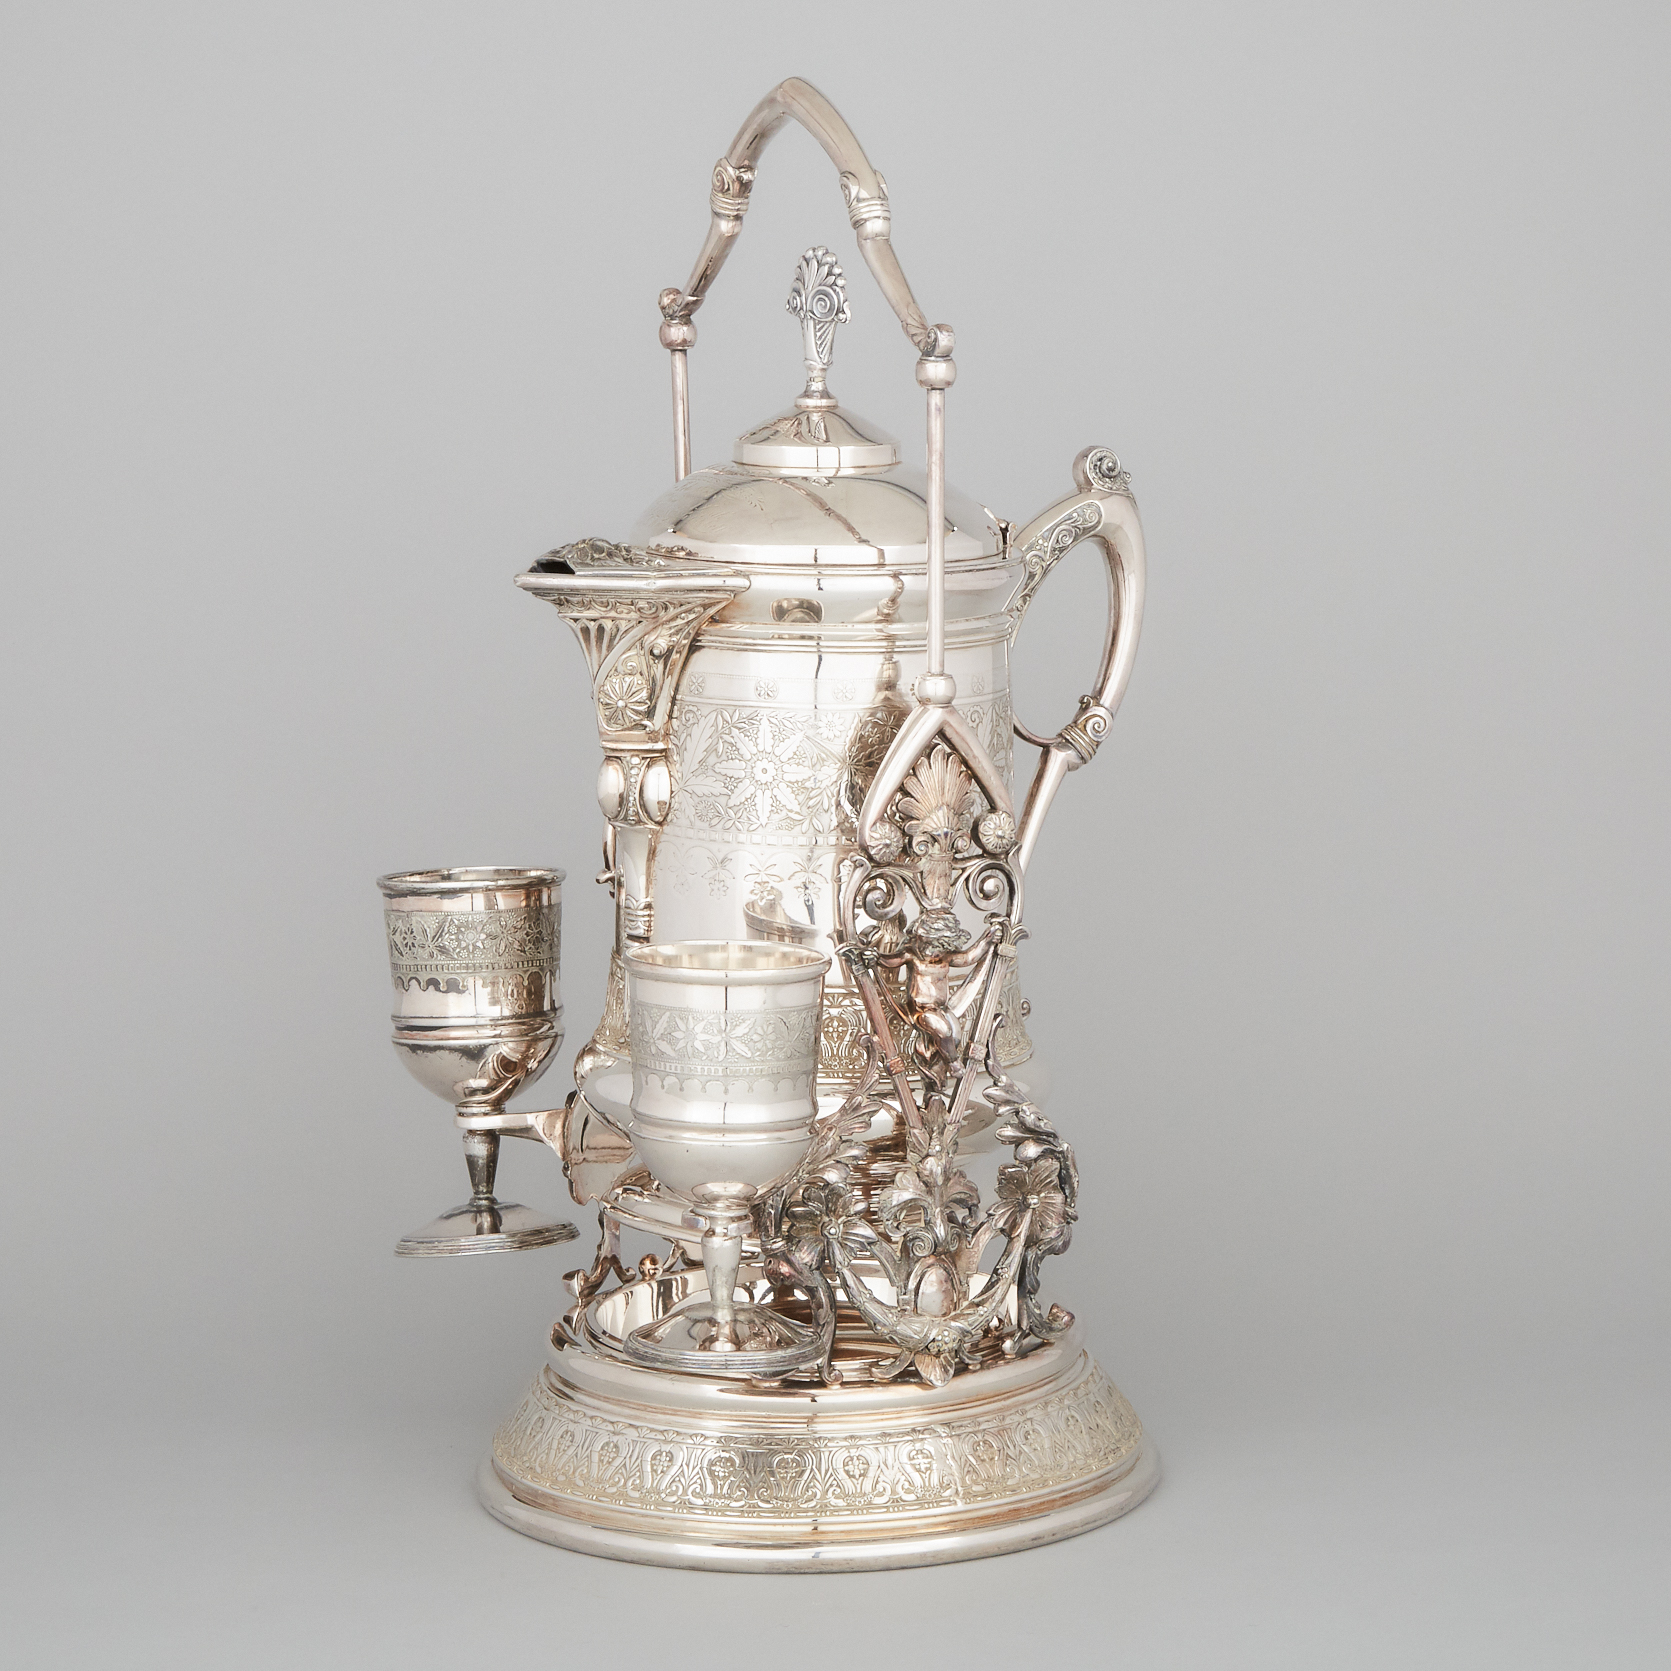 American Silver Plated Lemonade or Iced Water Jug on Stand, Meriden Britannia Co., c.1880